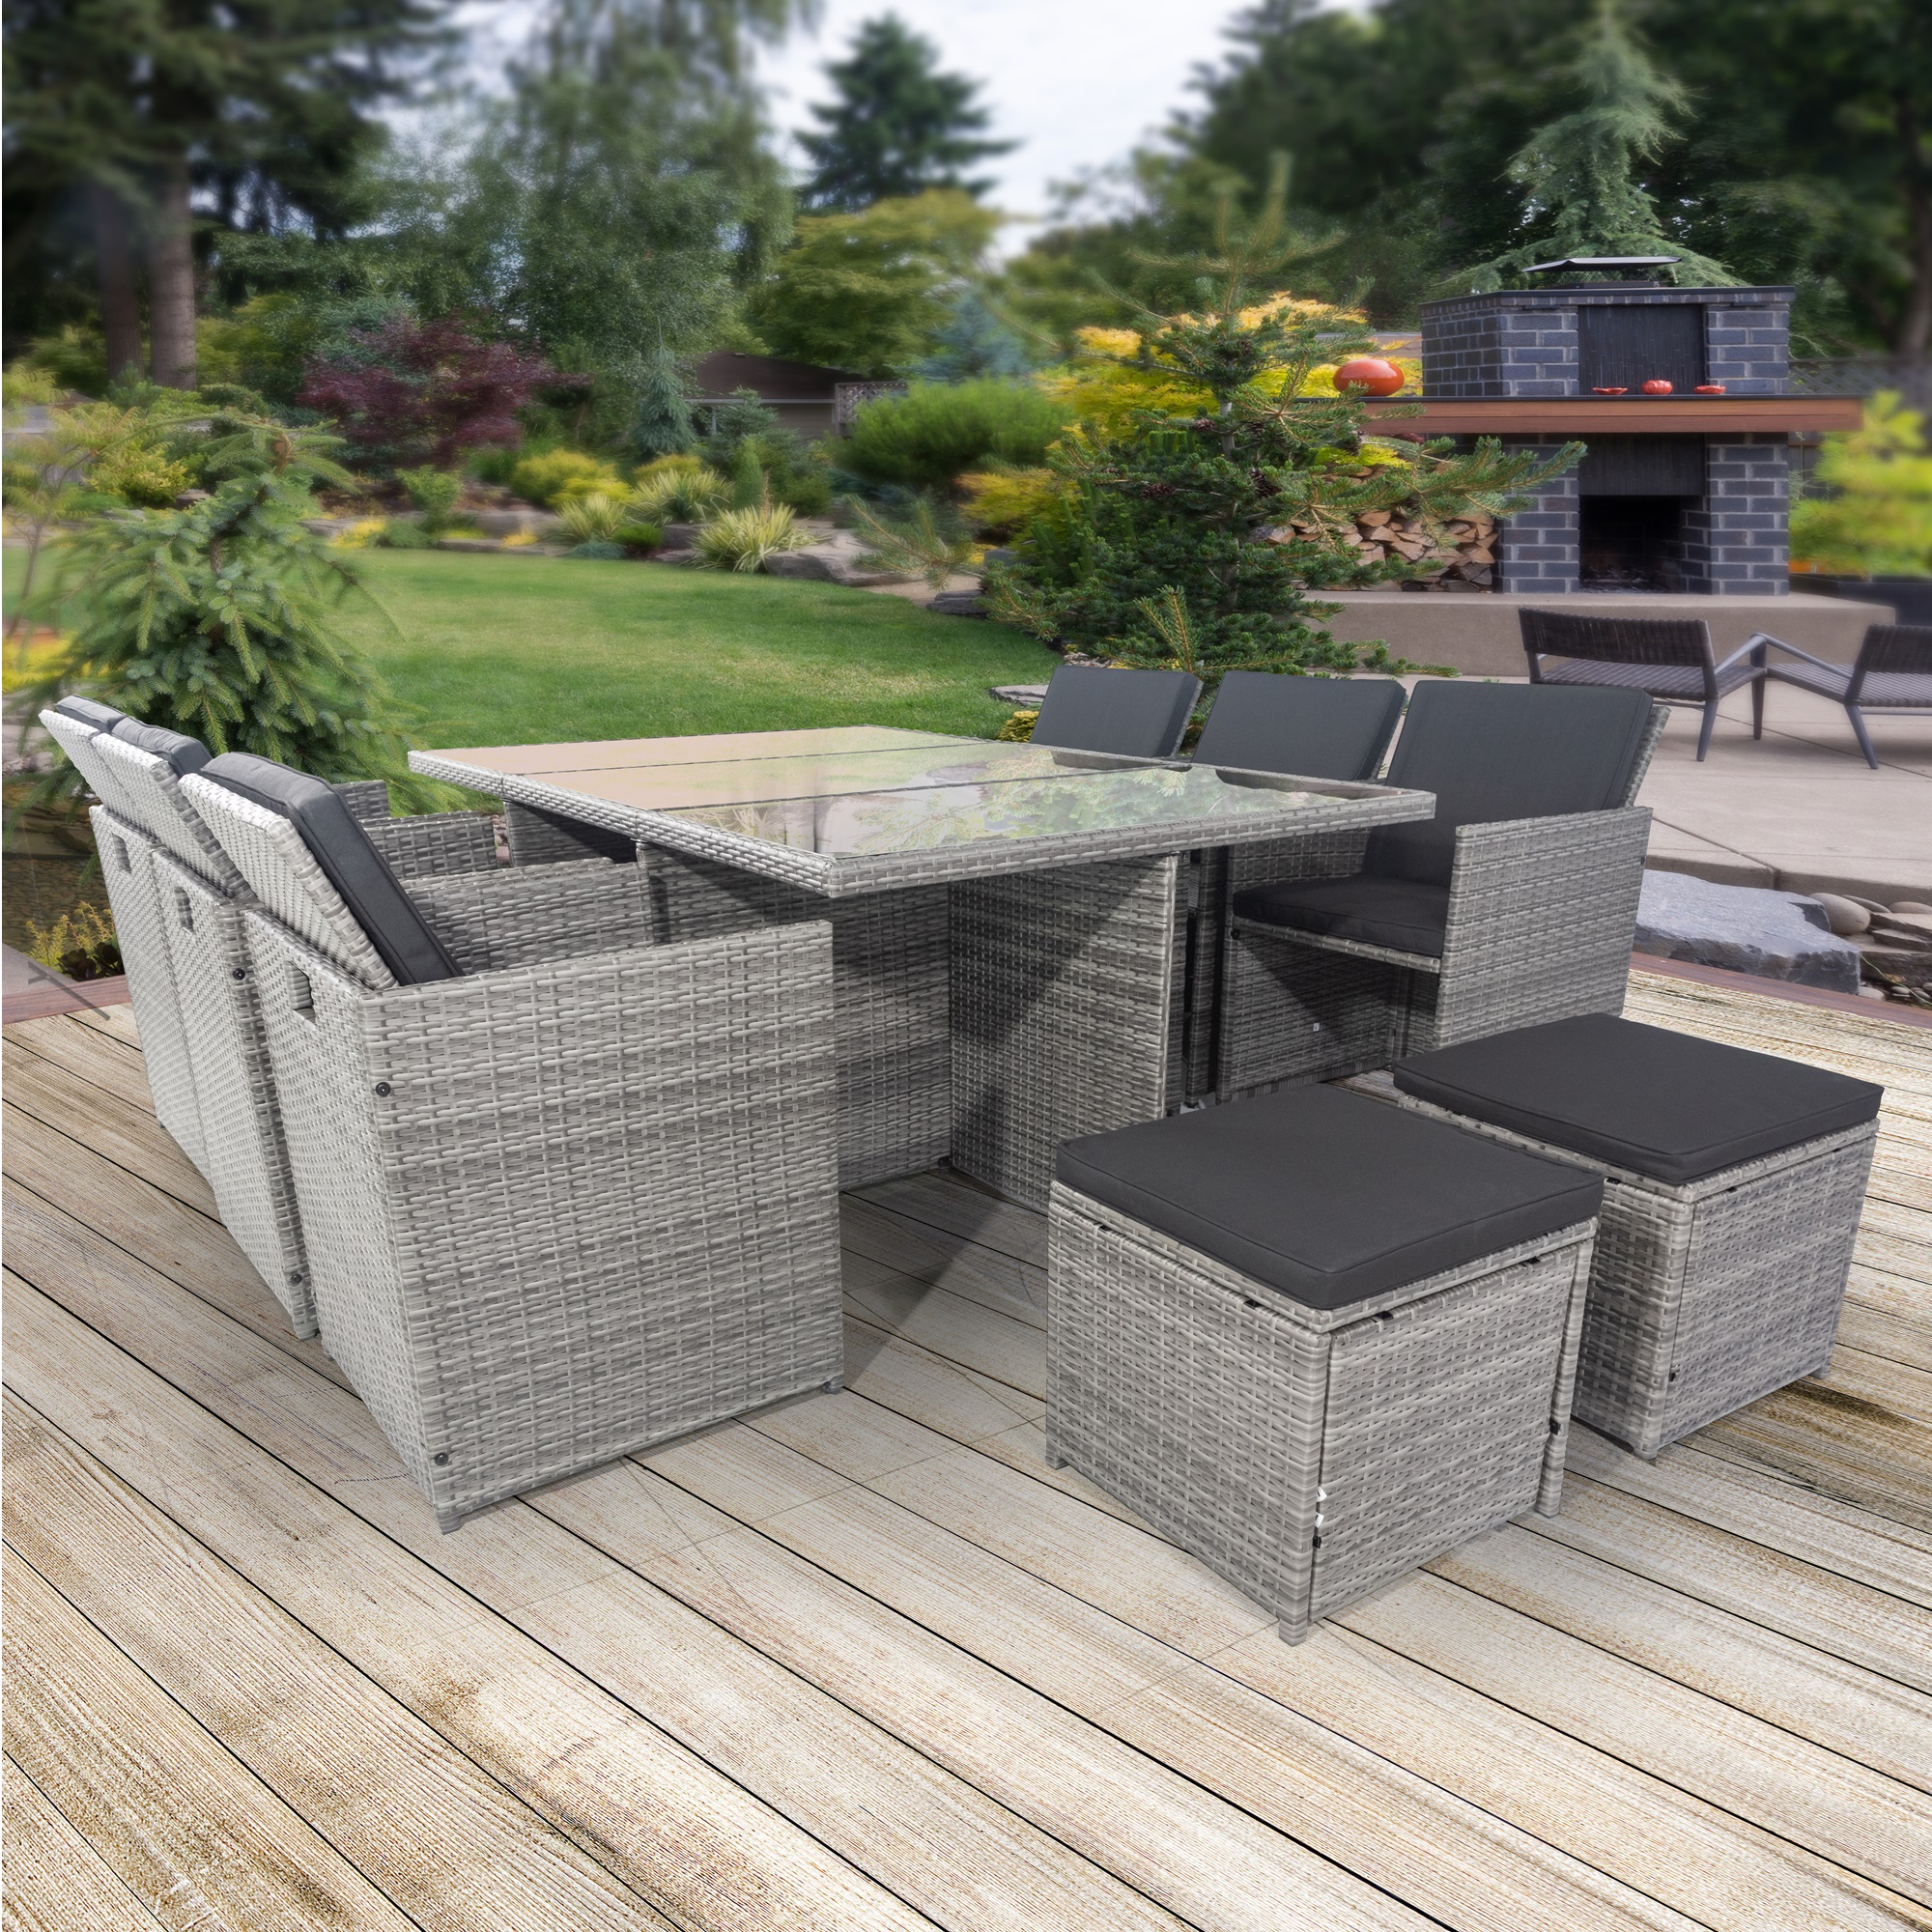 11 Pieces Patio Dining Sets Outdoor Space Saving Rattan Chairs with Glass Table Patio Furniture Sets Cushioned Seating and Back Sectional Conversation Set Grey